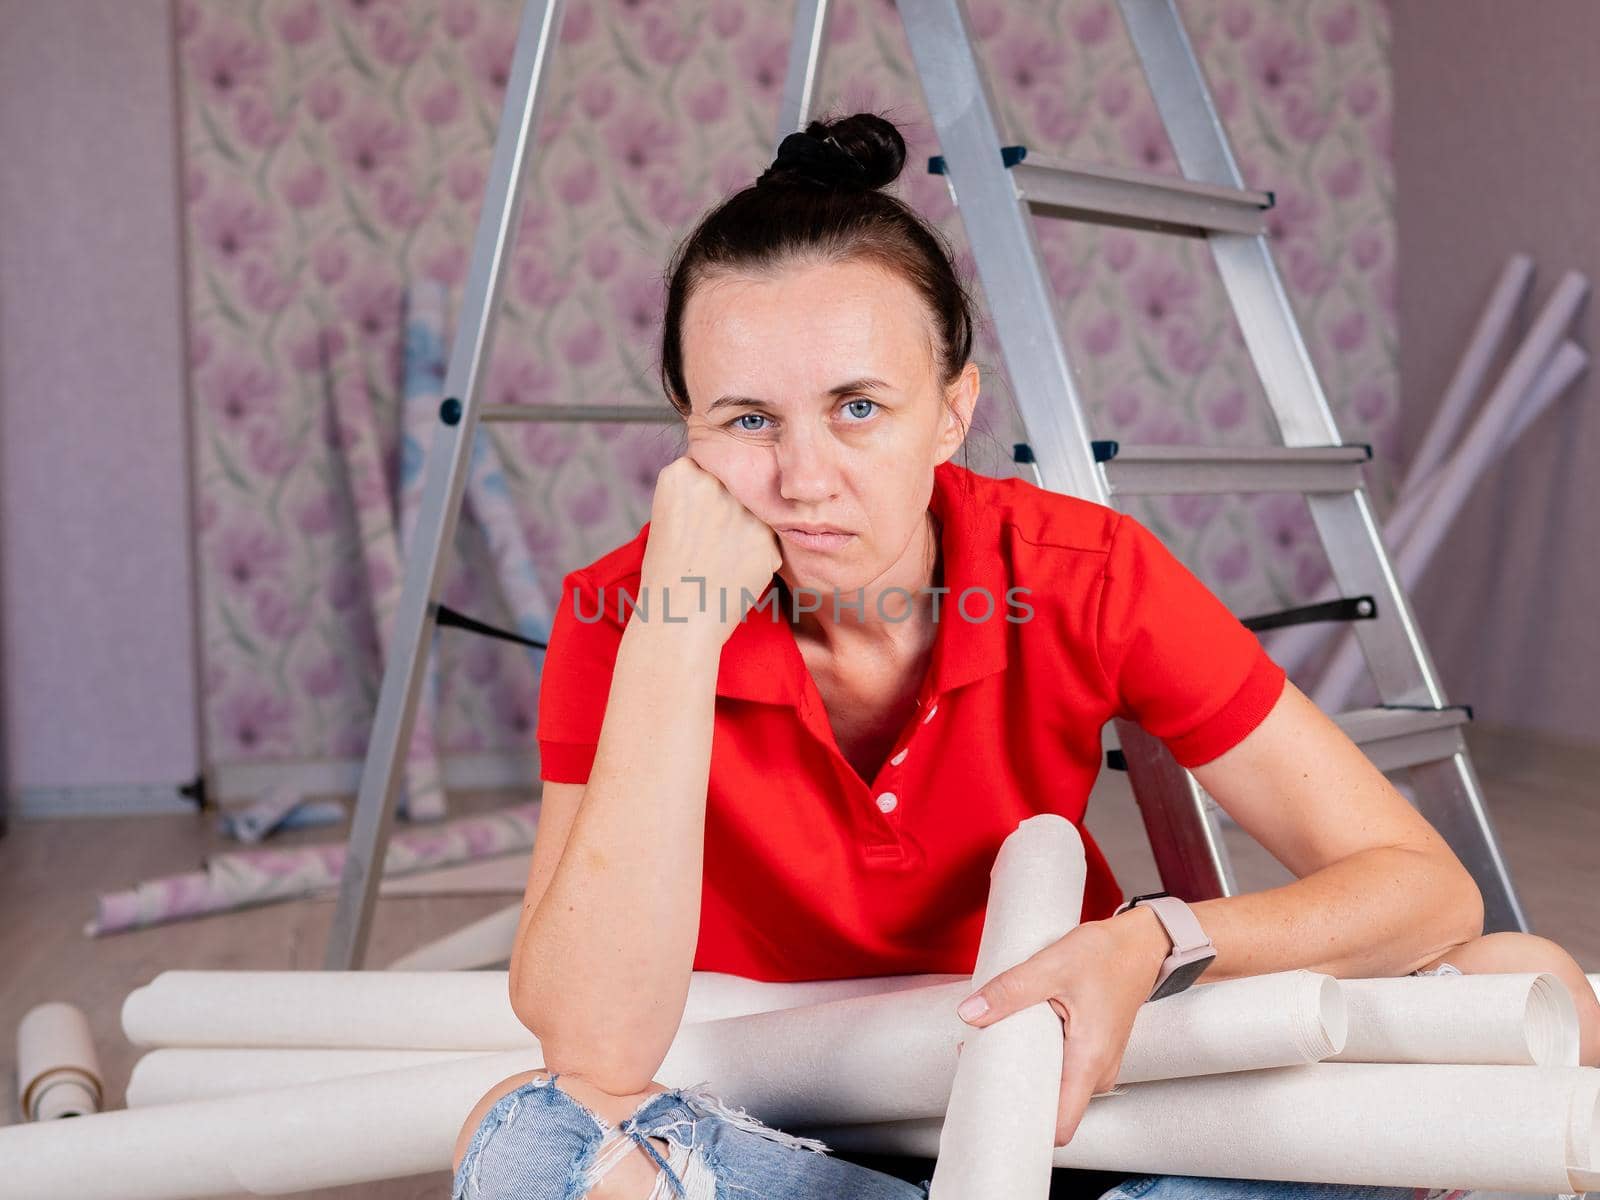 A woman sits on the floor and is sad because of the heavy repairs in the apartment. Wallpapering in the room. by Utlanov